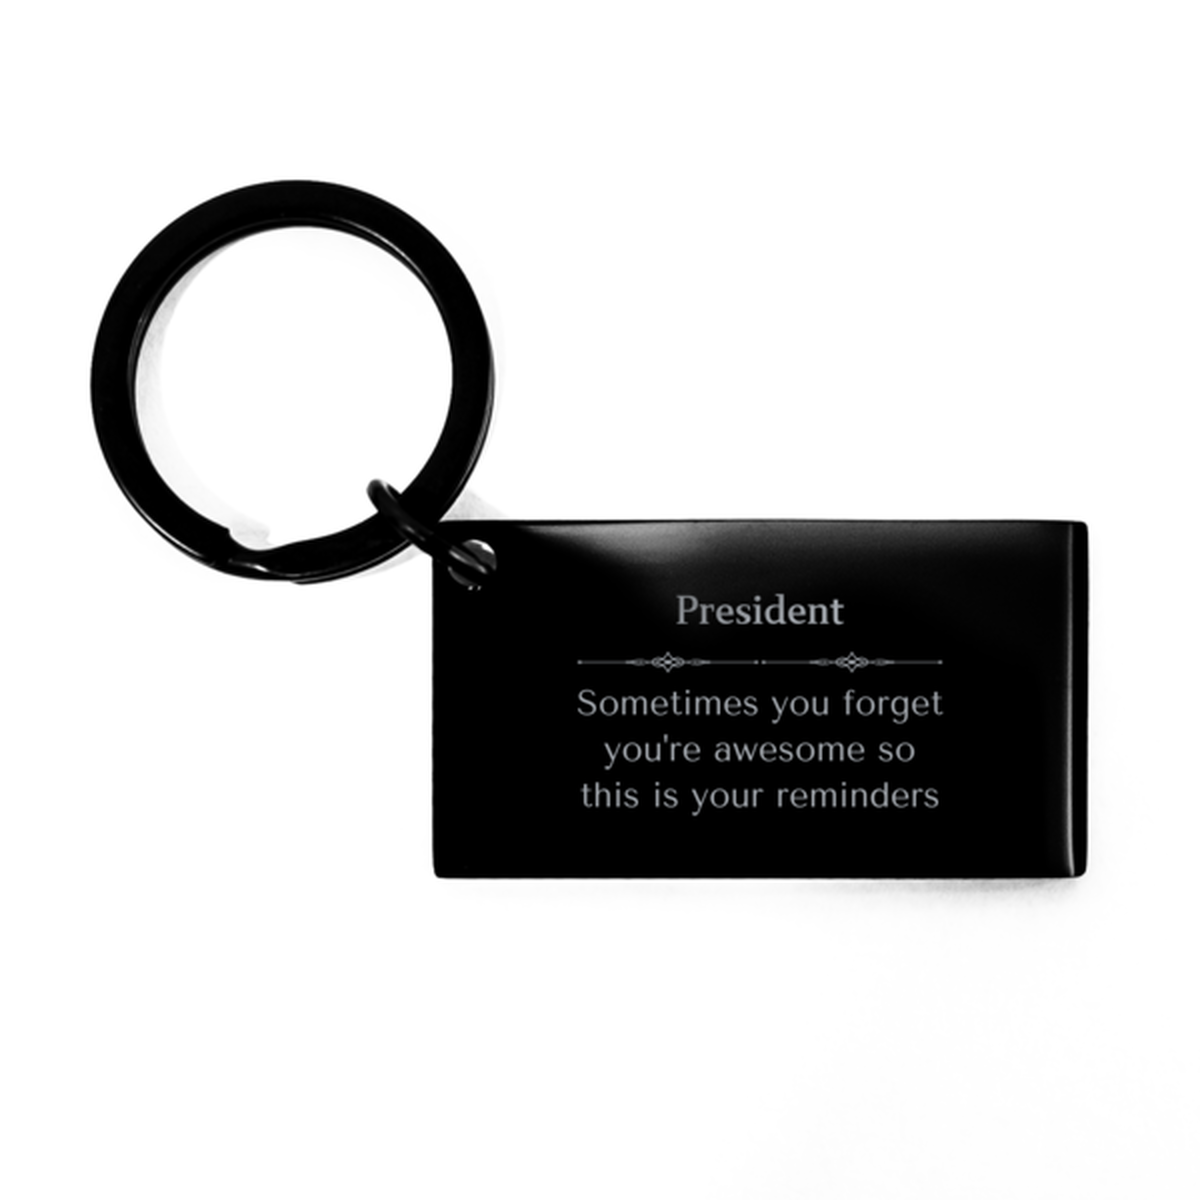 Sentimental President Keychain, Shampooer Sometimes you forget you're awesome so this is your reminders, Graduation Christmas Birthday Gifts for President, Men, Women, Coworkers